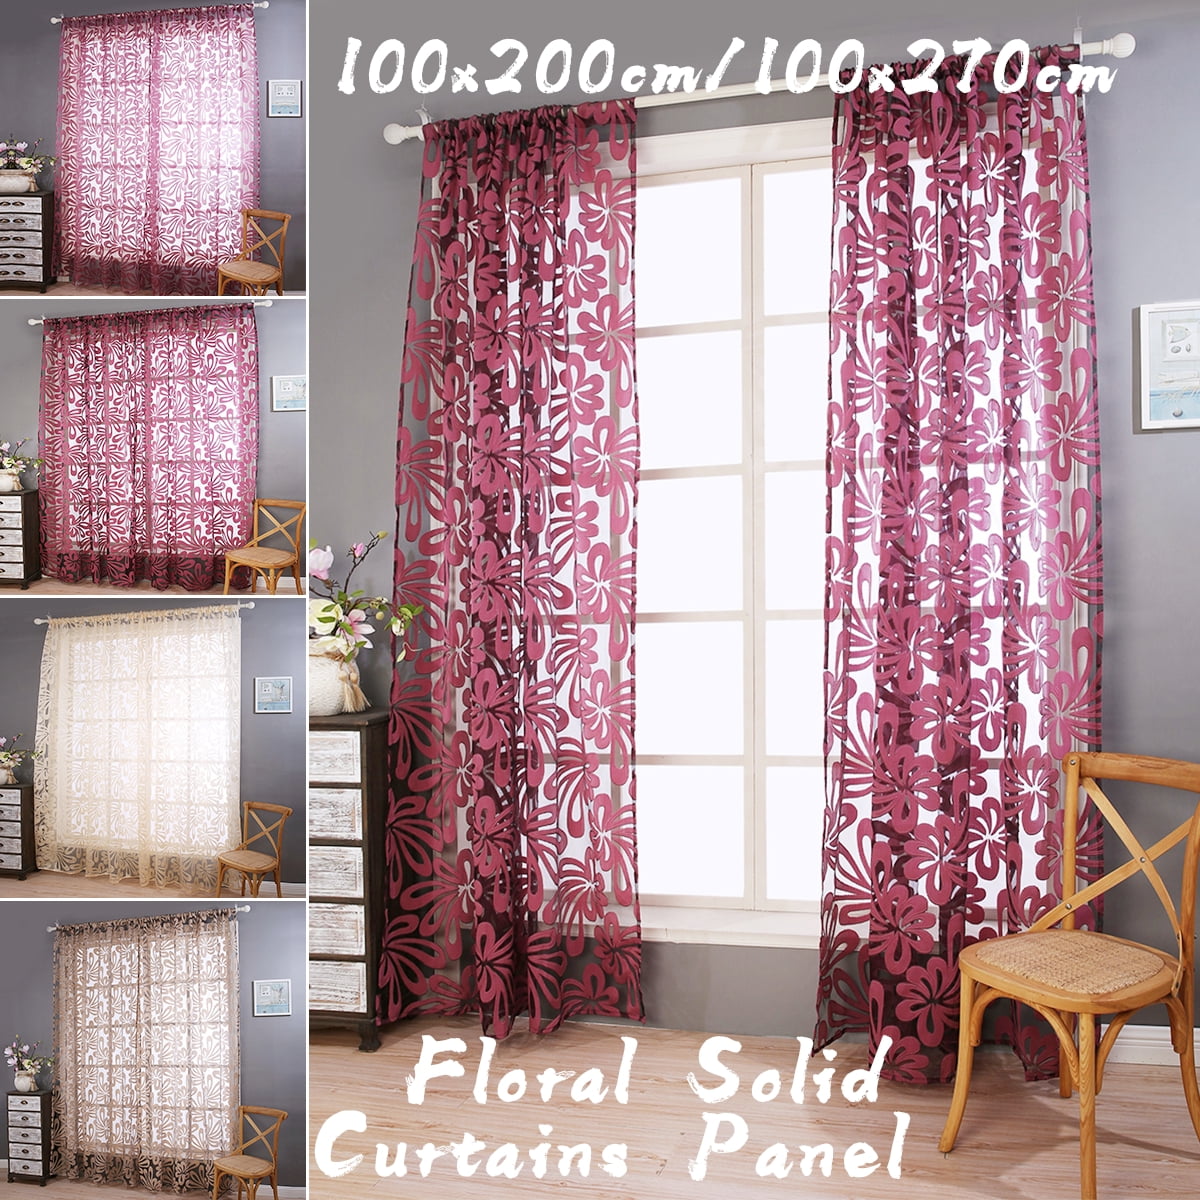 1/2 Home Floral Tulle Voile Door Window Curtain Drape Panel Sheer Scarf Valances 